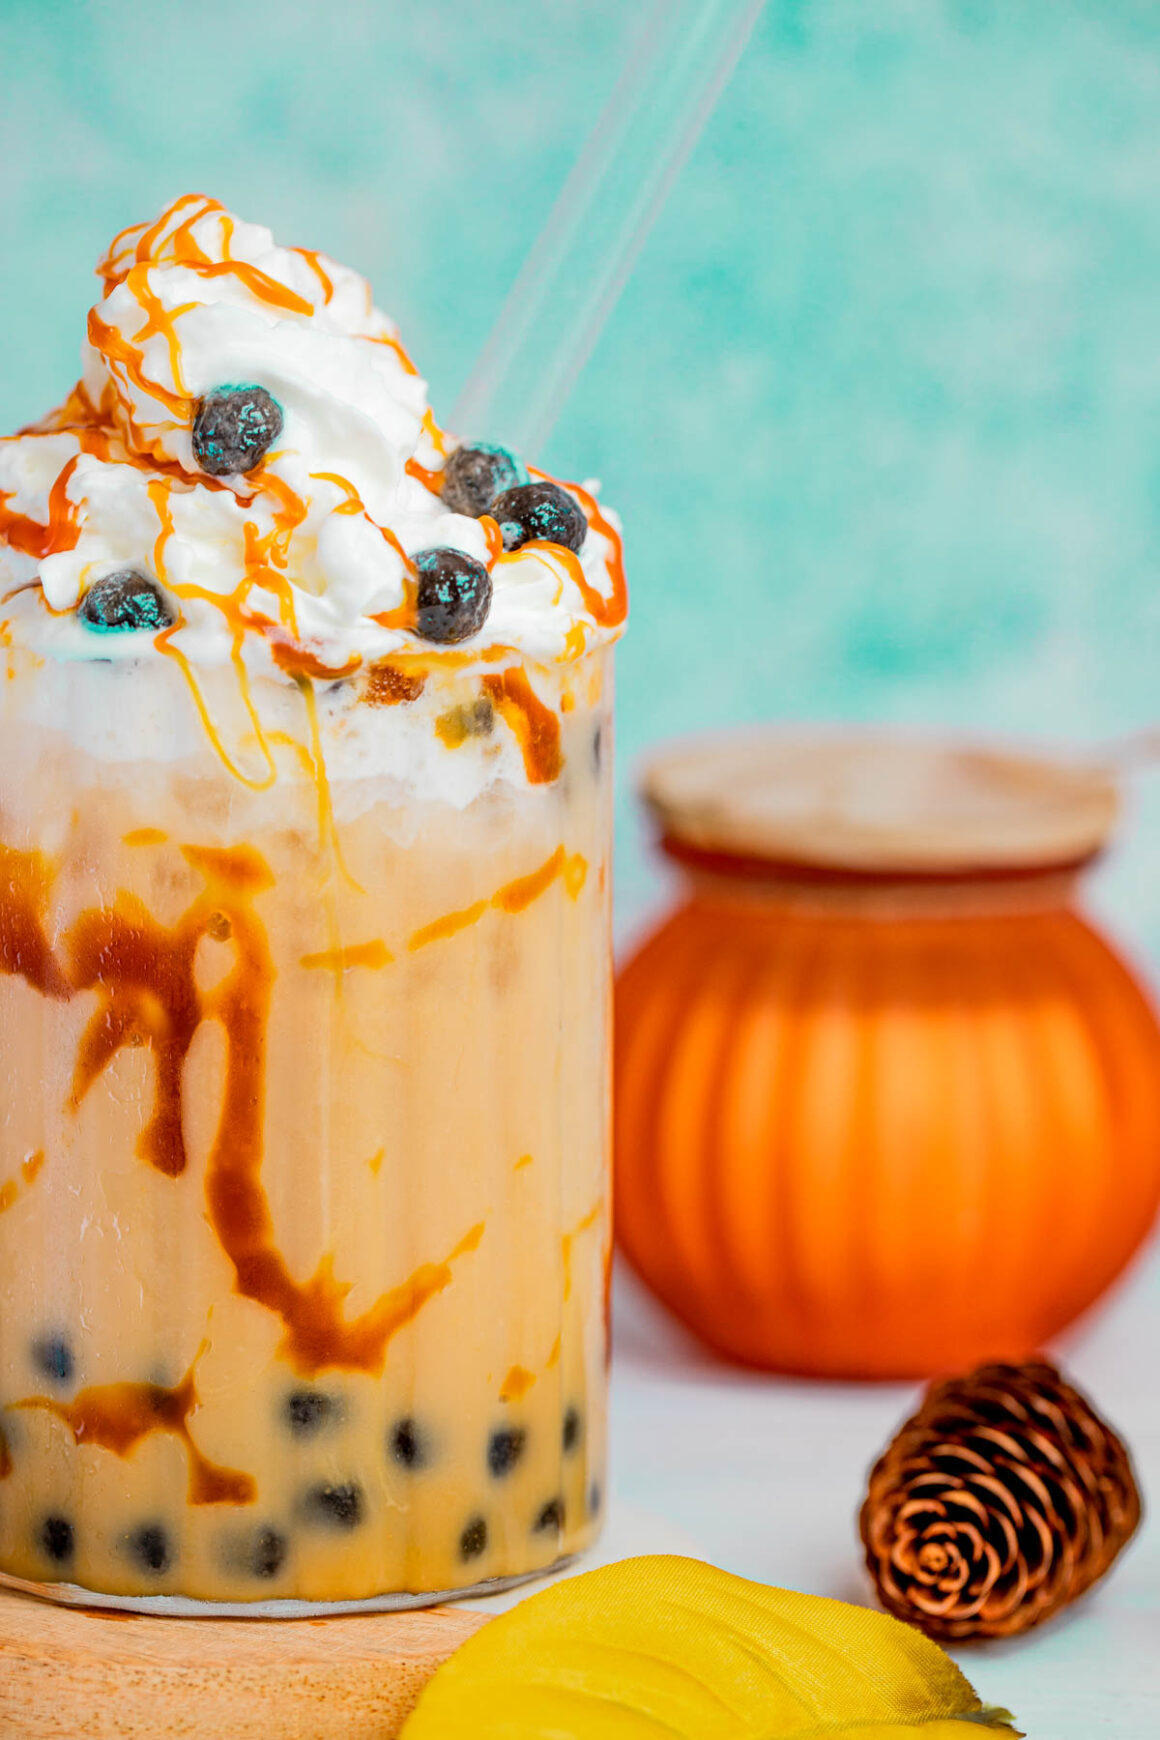 Pumpkin Pie Bubble Tea is a harmonious blend of key ingredients that work together to create its distinctive flavor.